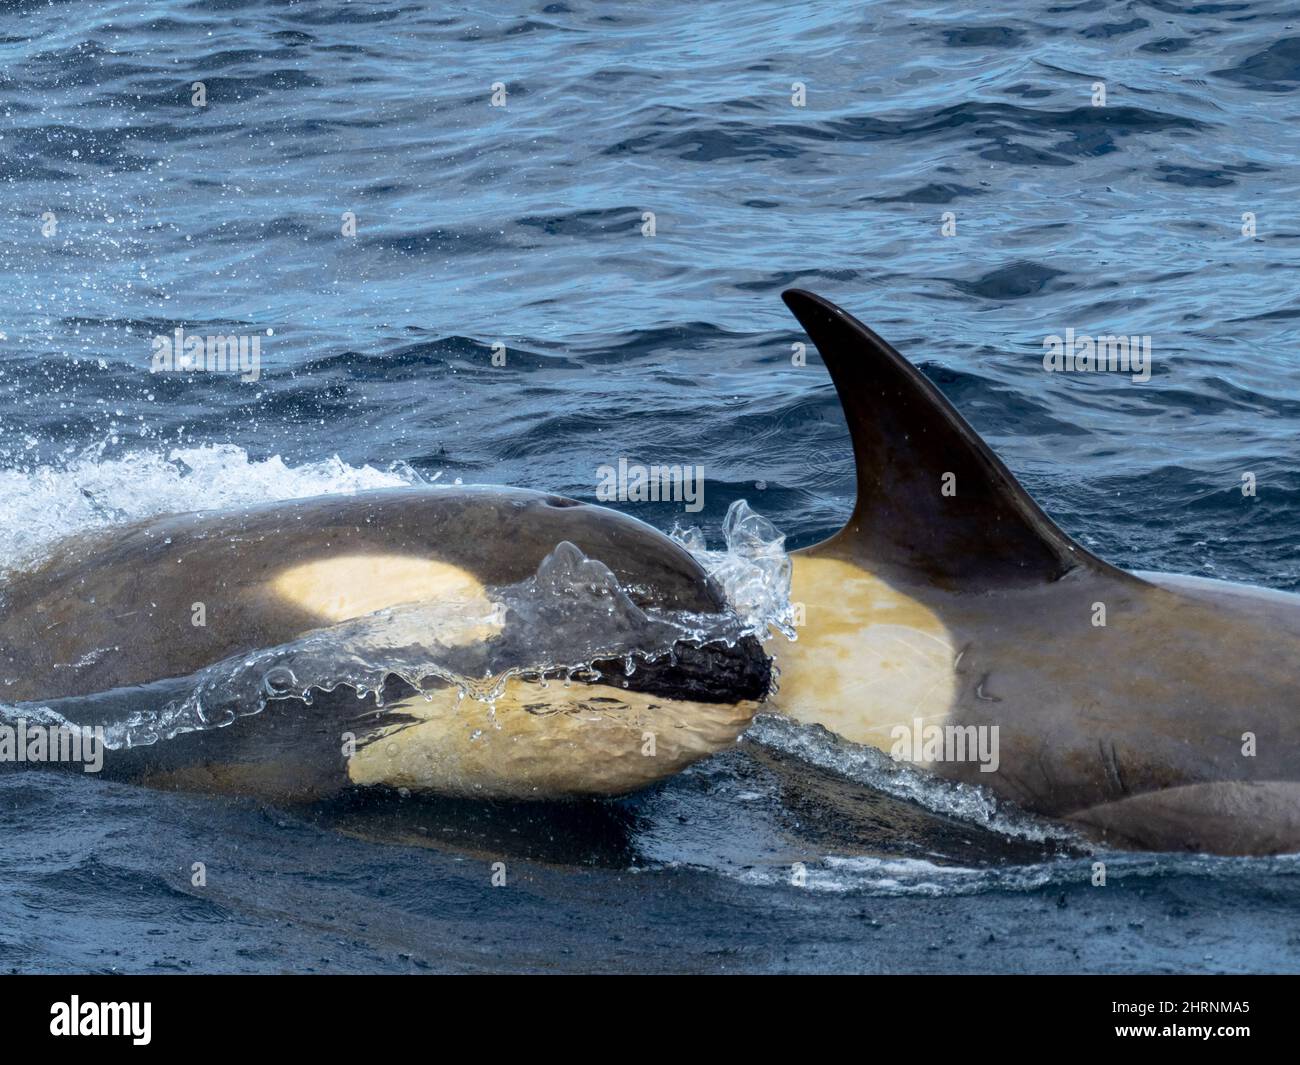 Type B2 killer whale, Orcinus orca in the Weddell Sea, Antarctica Stock Photo